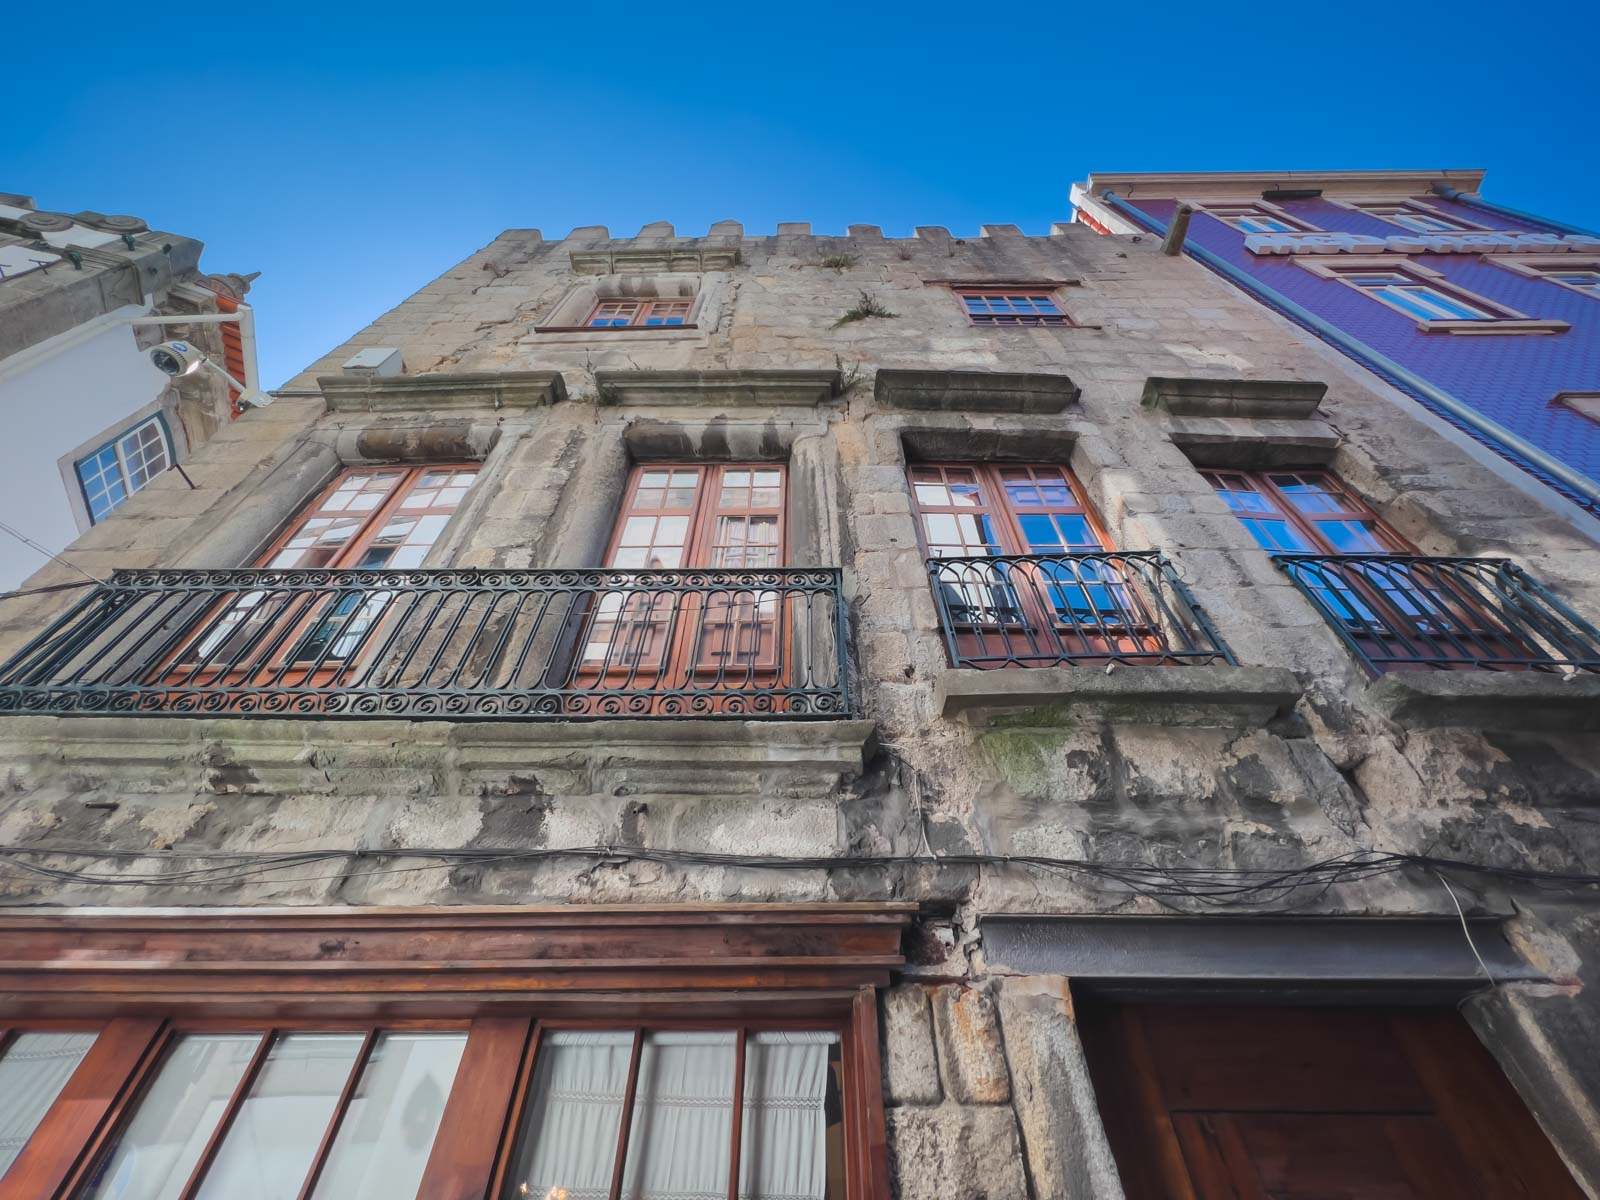 Where to Stay in Porto - A Local's Guide to Porto's Neighborhoods